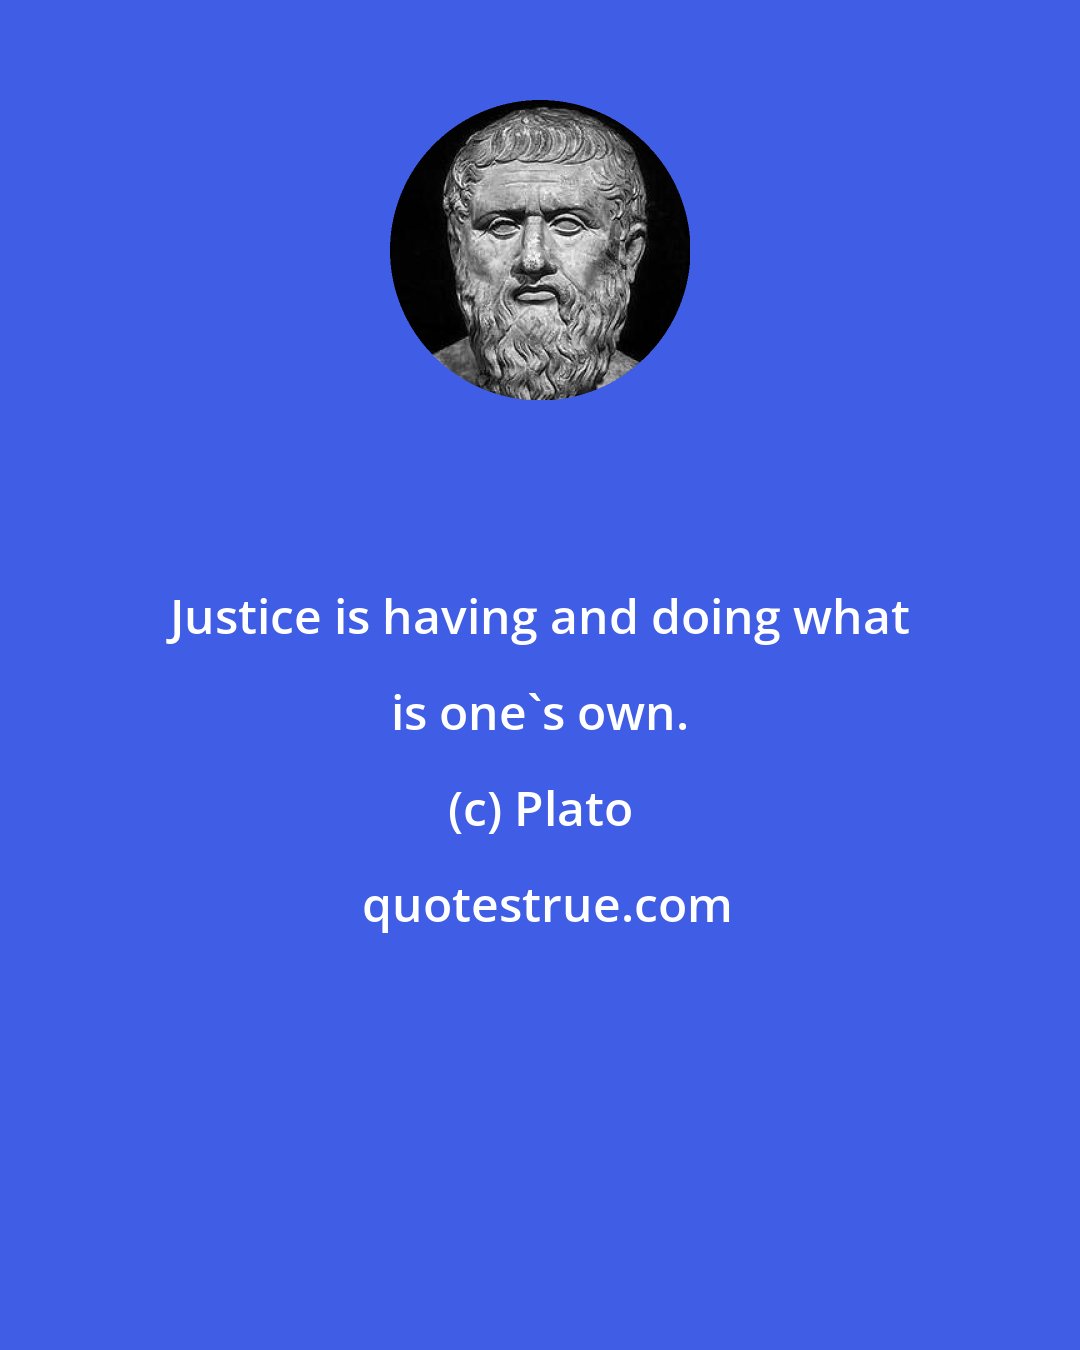 Plato: Justice is having and doing what is one's own.